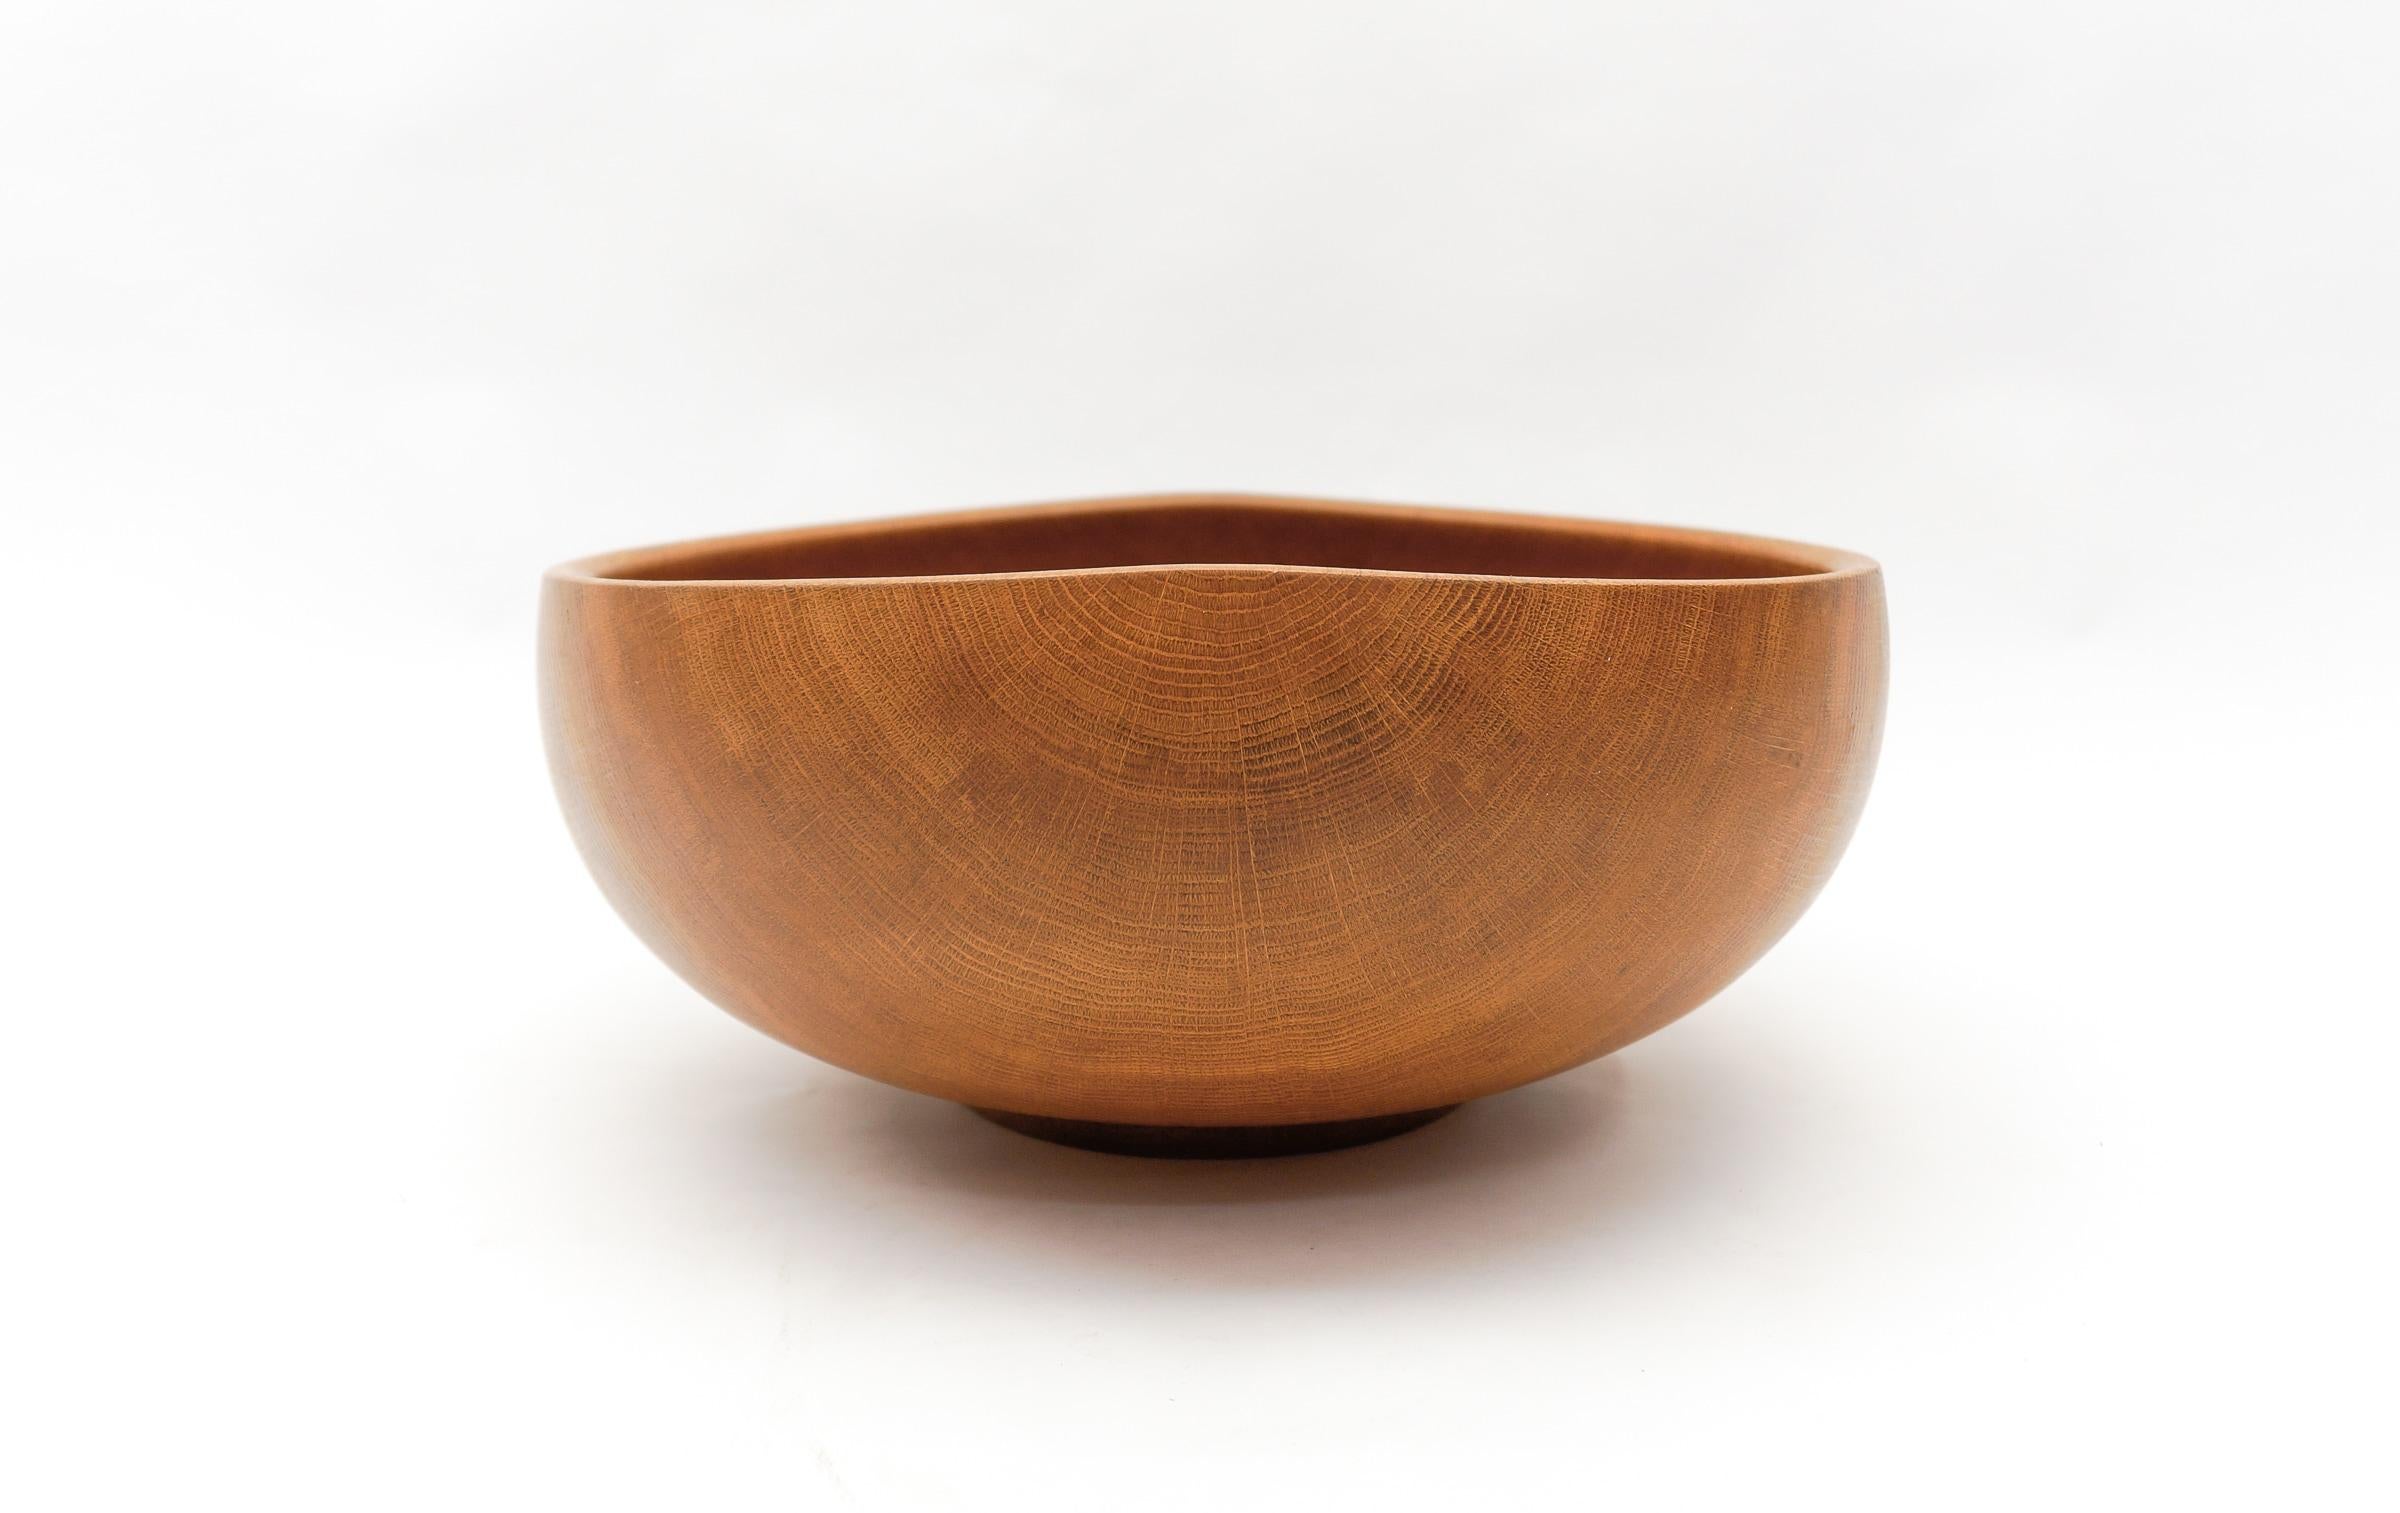 Awesome Huge Mid-Century Modern Oak Bowl by K. Weichselbaum, 1999 Germany For Sale 3